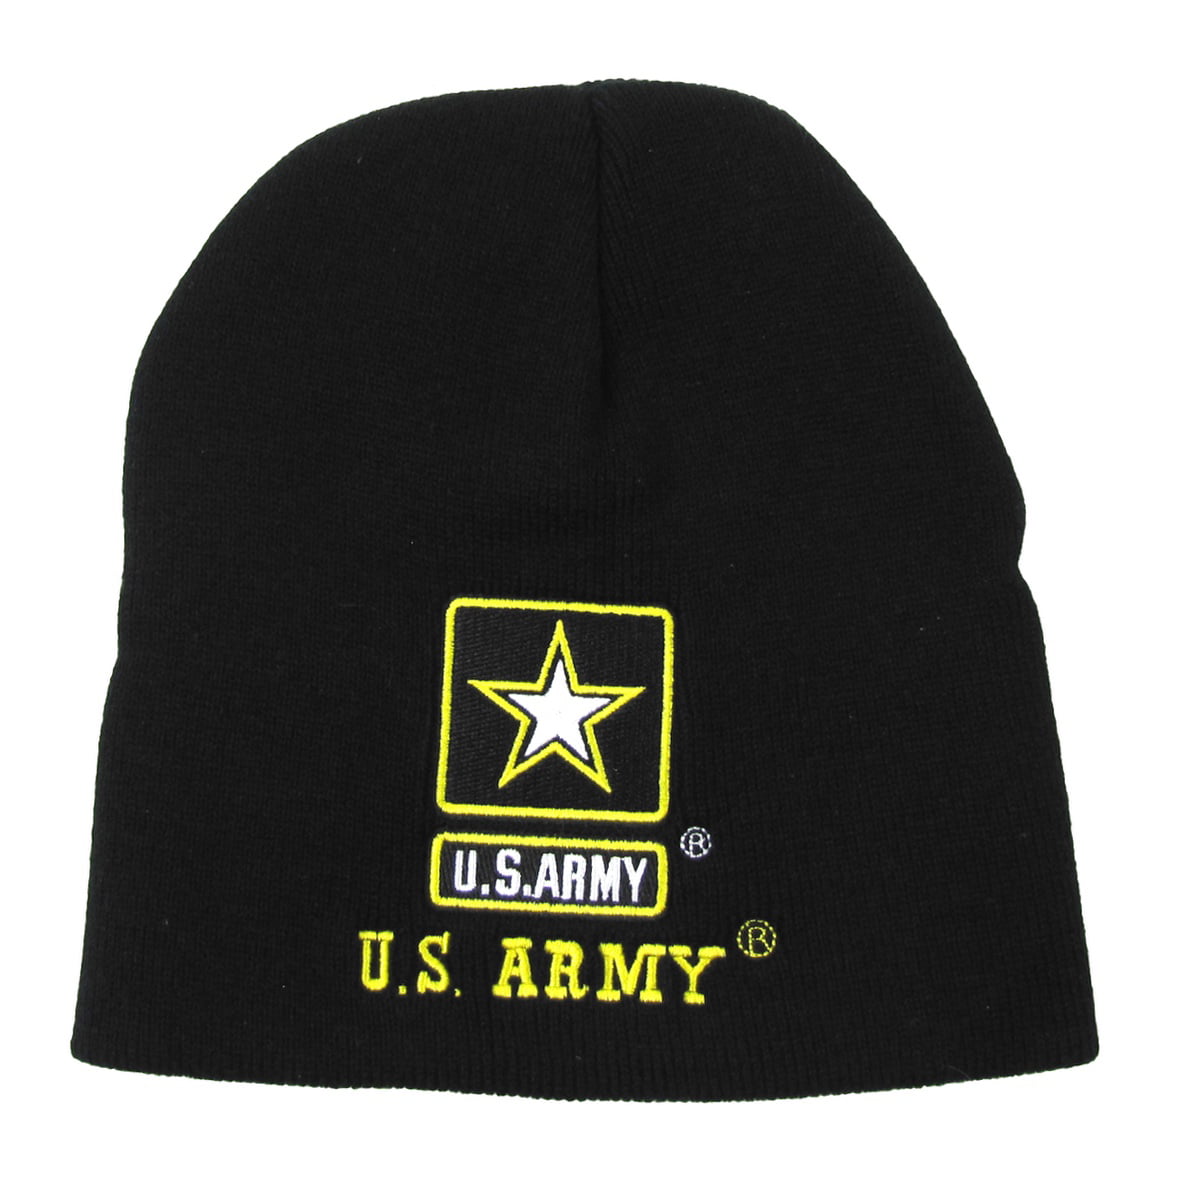 U.S ARMY VETERAN Hat Cap Military Official Licensed Embroidered Baseball Cap